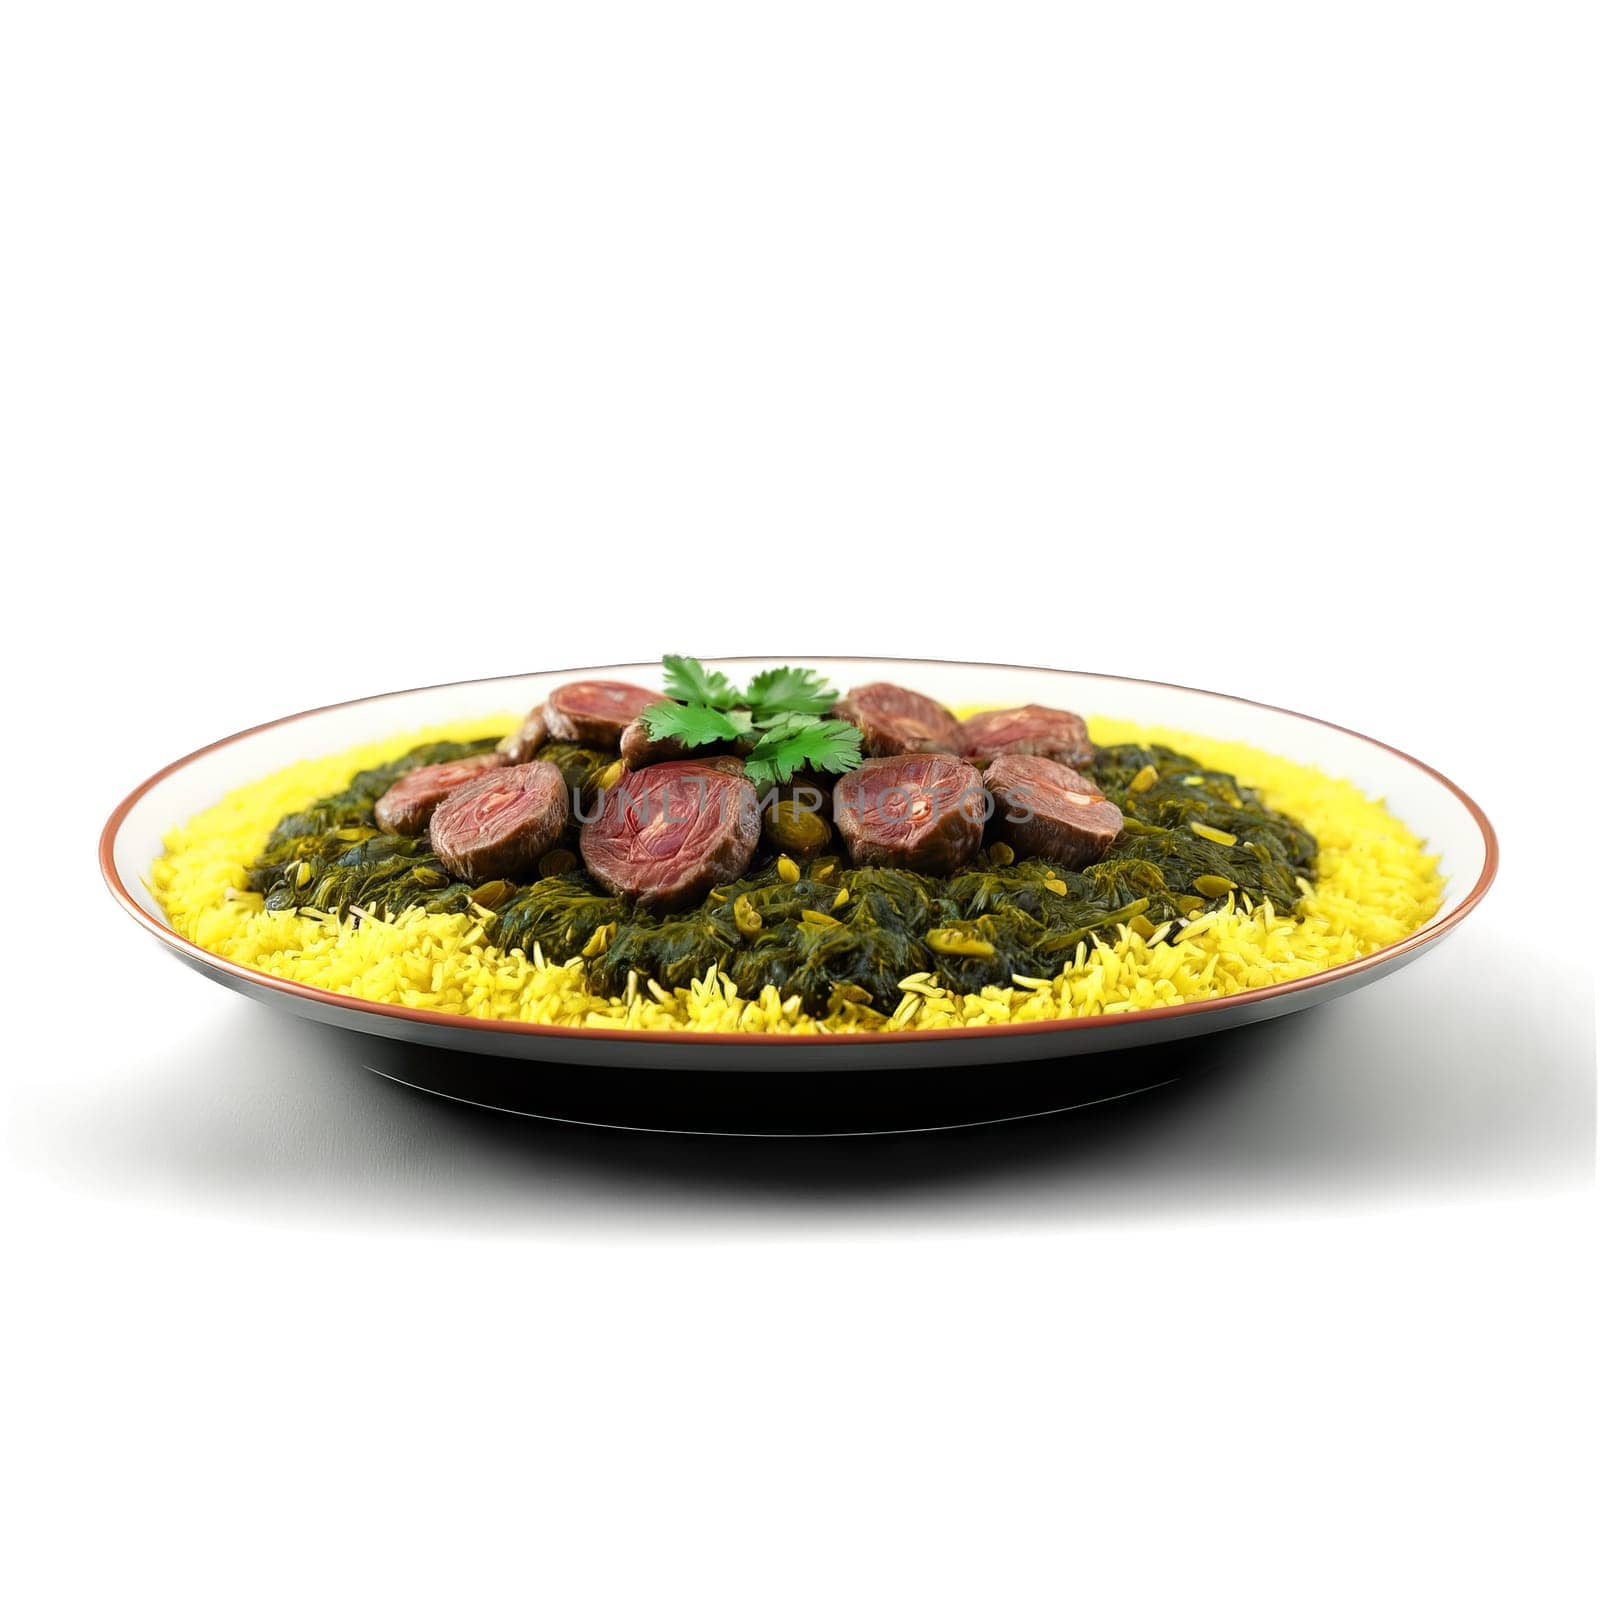 Iranian ghormeh sabzi herb stew lamb kidney beans dried limes served with saffron rice Culinary by panophotograph